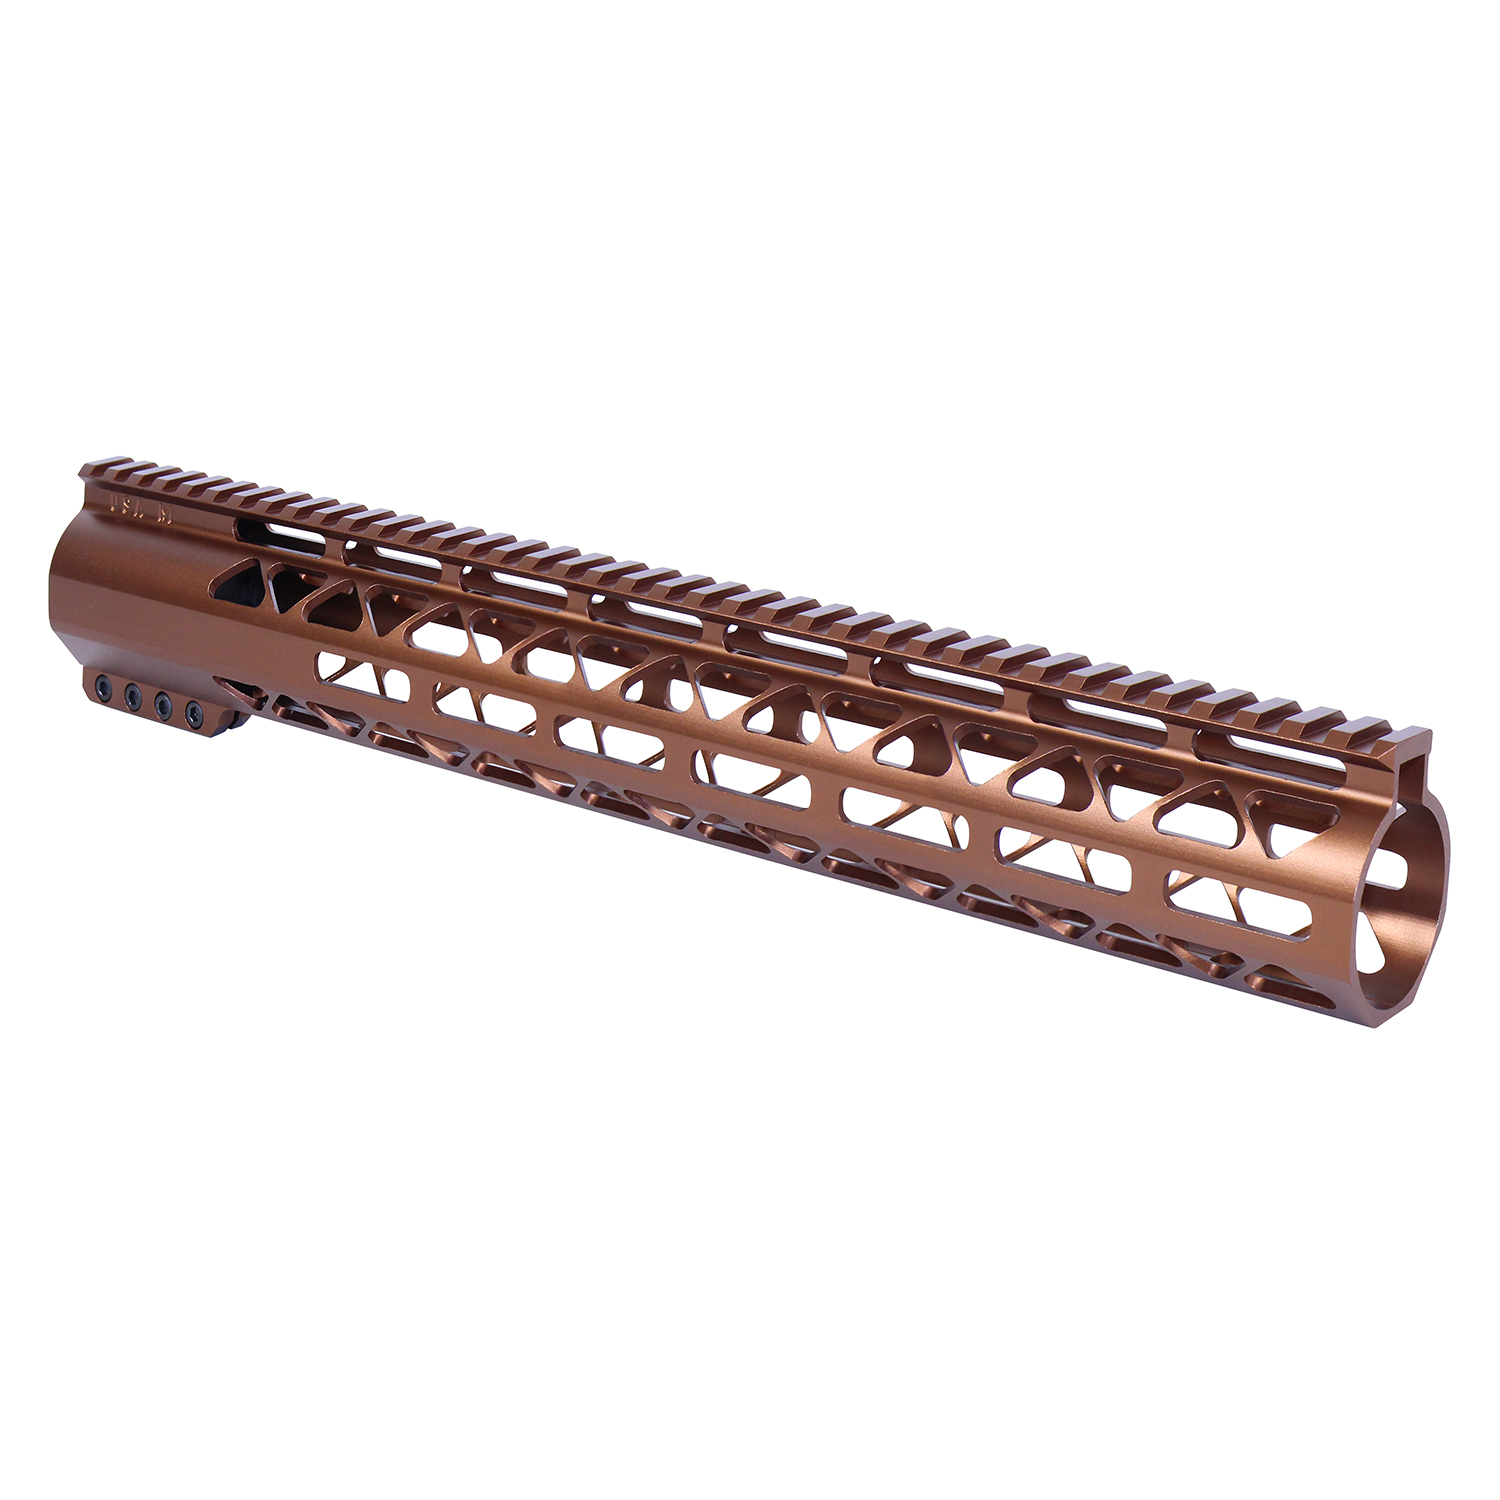 15" AIR-LOK Series M-LOK Compression Free Floating Handguard With Monolithic Top Rail (.308 Cal) (Anodized Bronze)